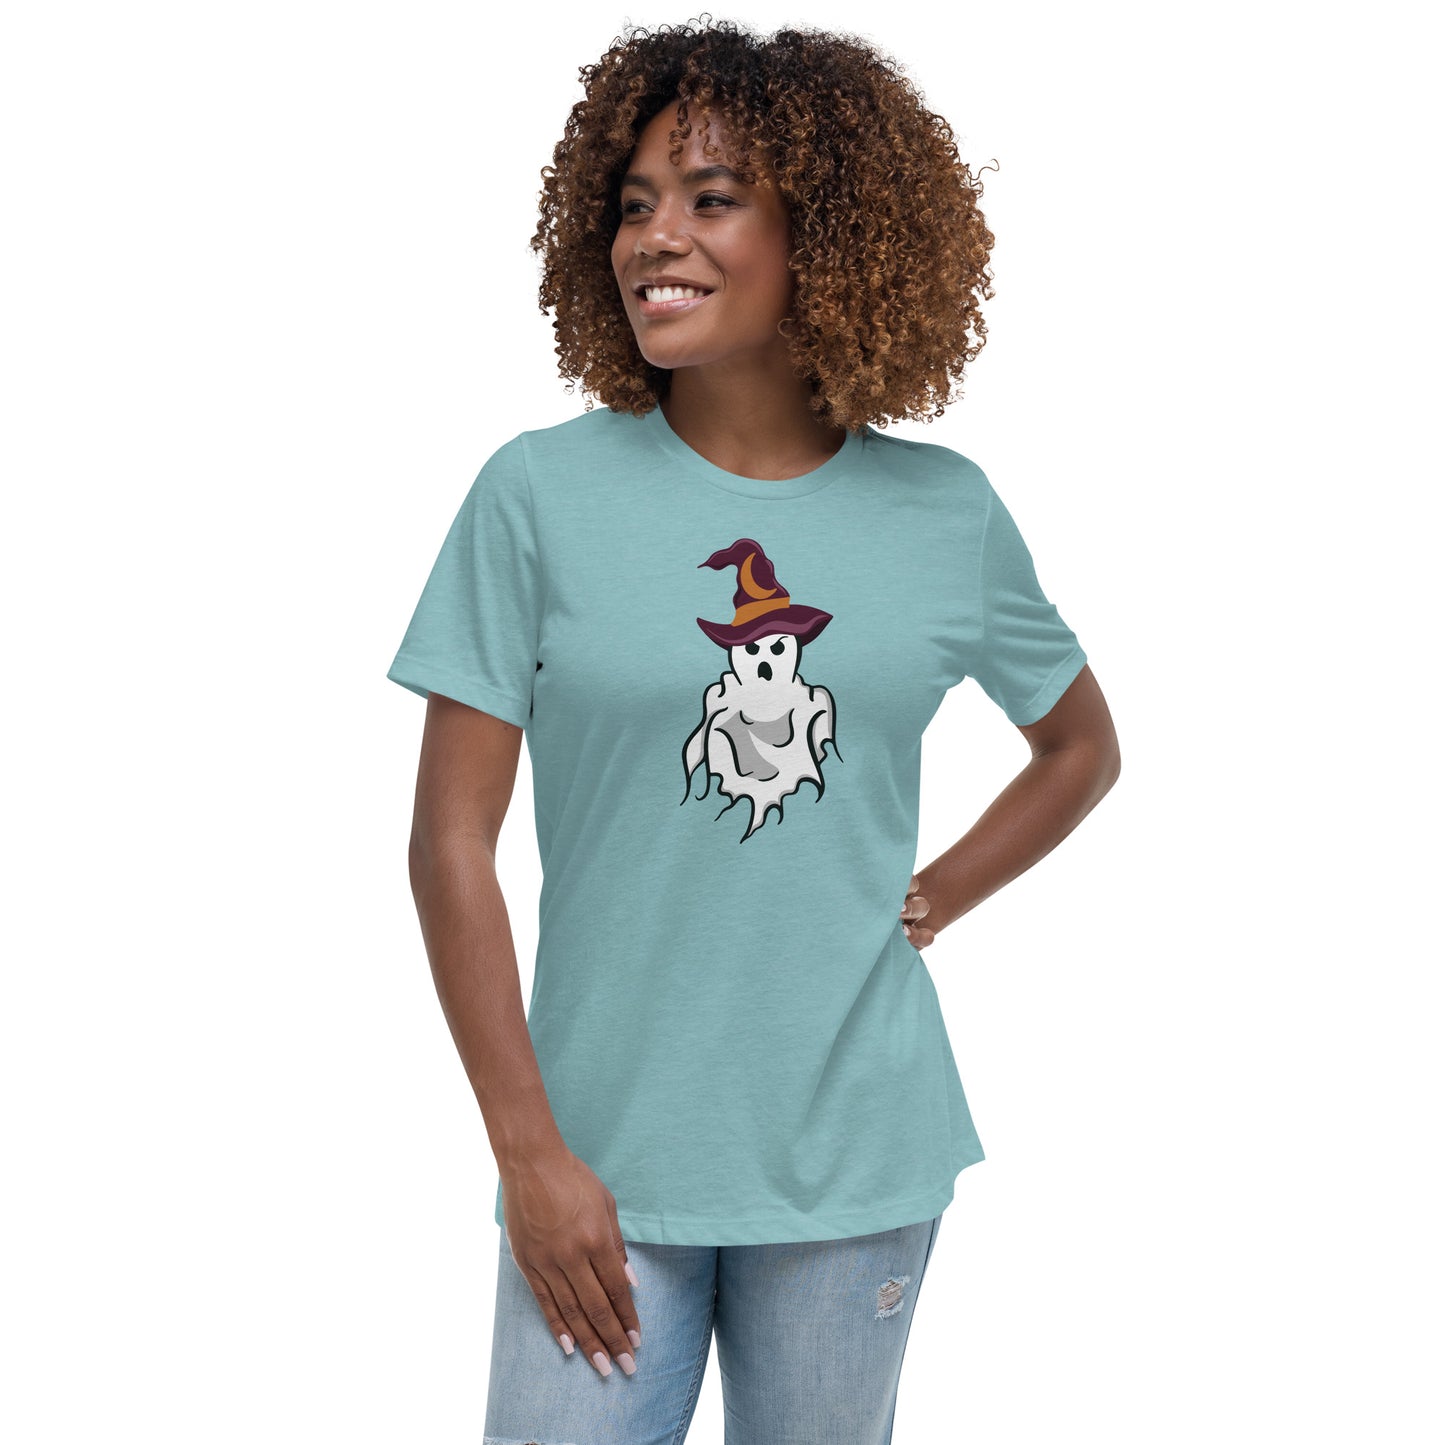 Model wearing a shirt featuring a ghost wearing a witch hat